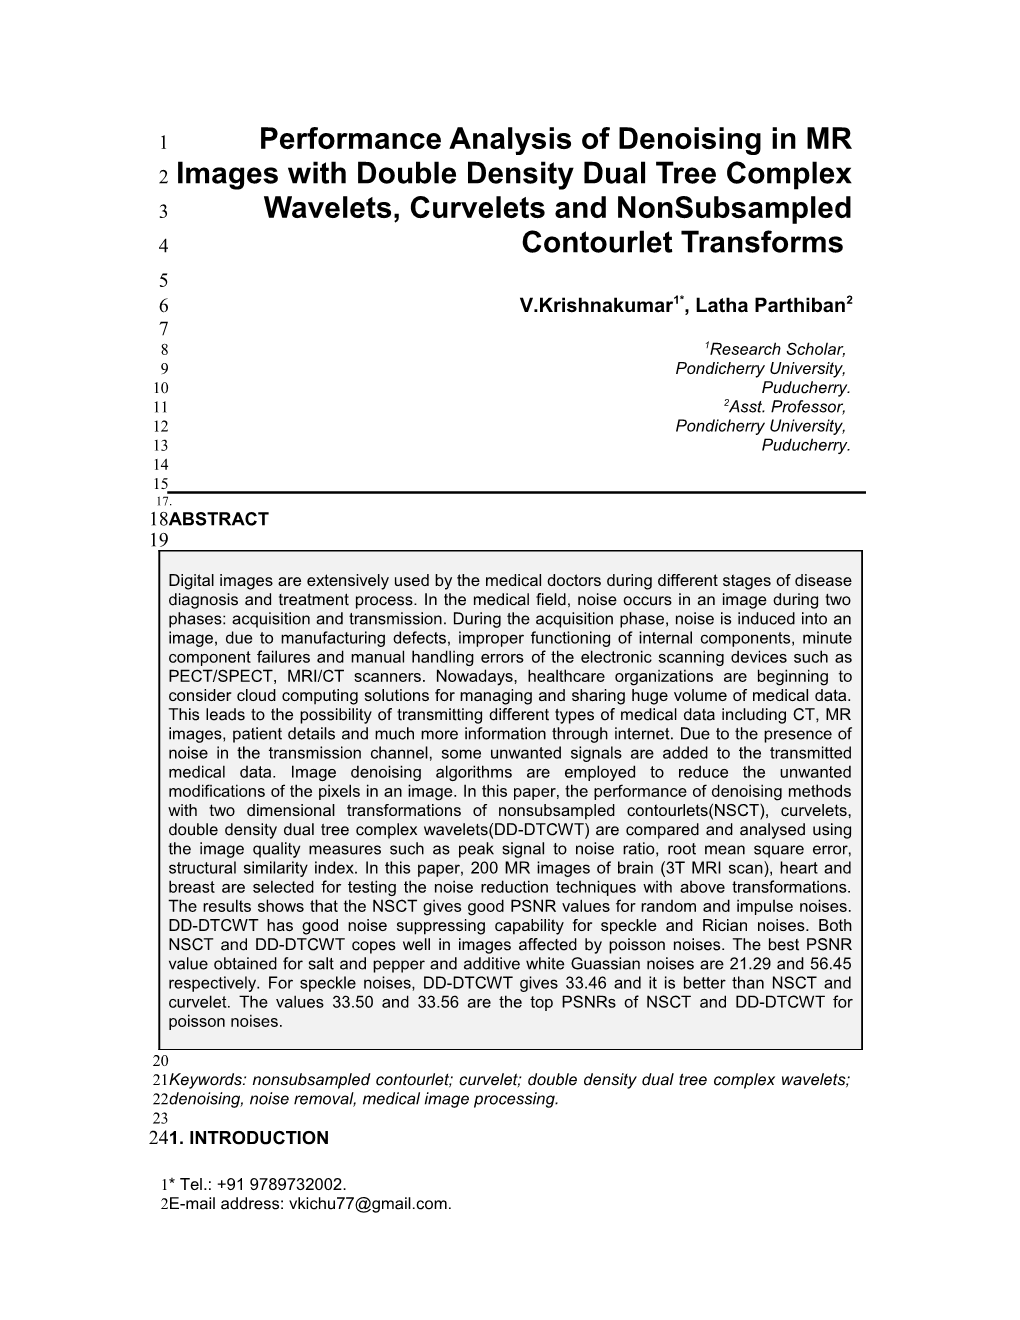 Performance Analysis of Denoising in MR Images with Double Density Dual Tree Complex Wavelets